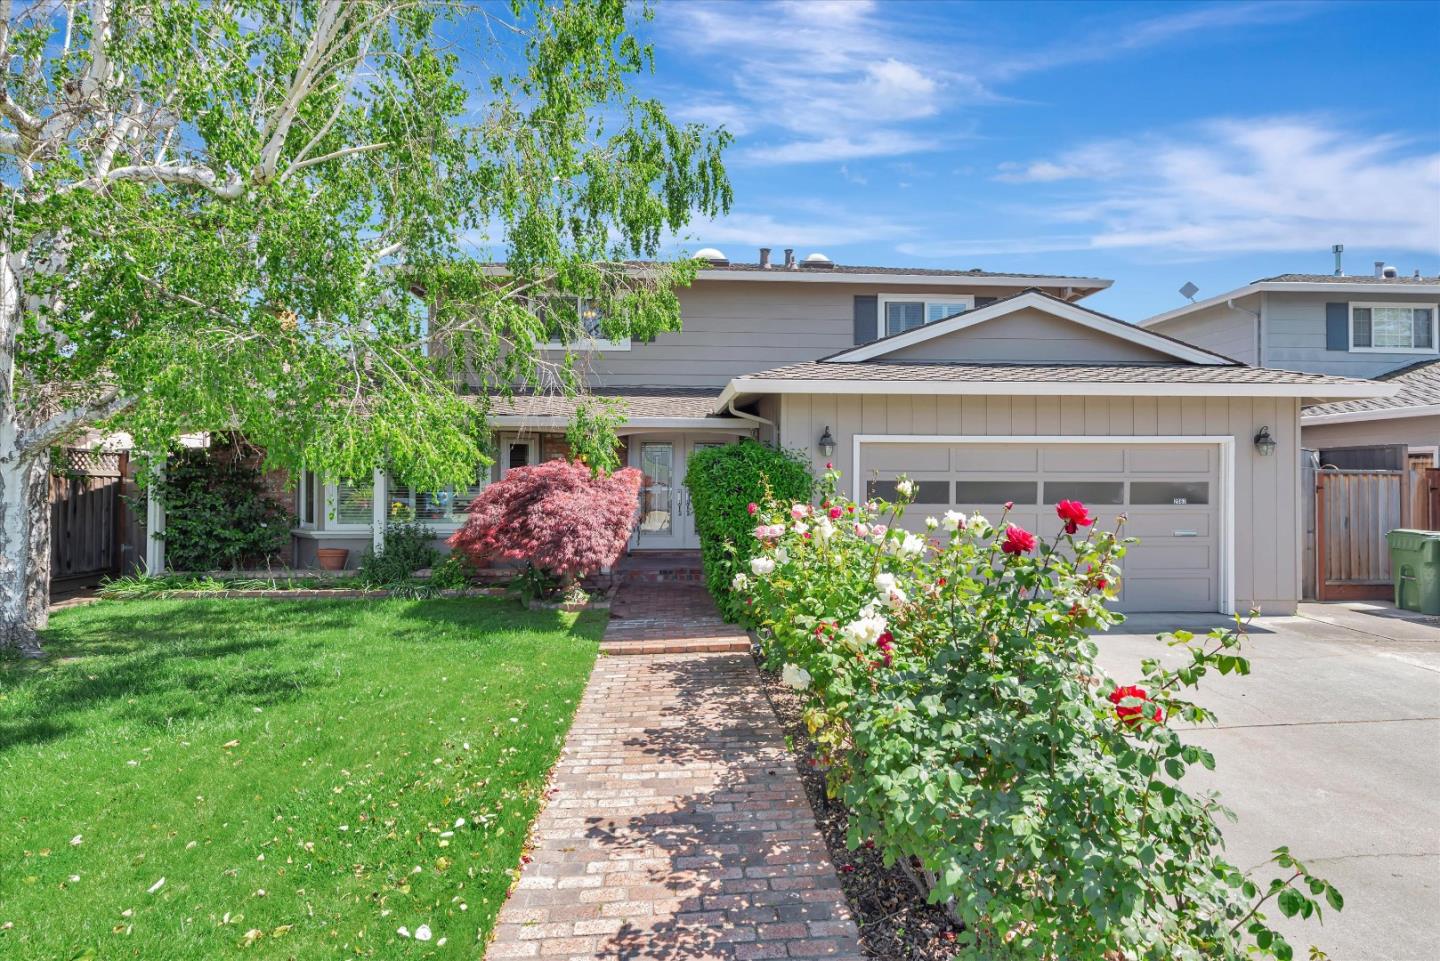 Photo of 2567 Hill Park Dr in San Jose, CA